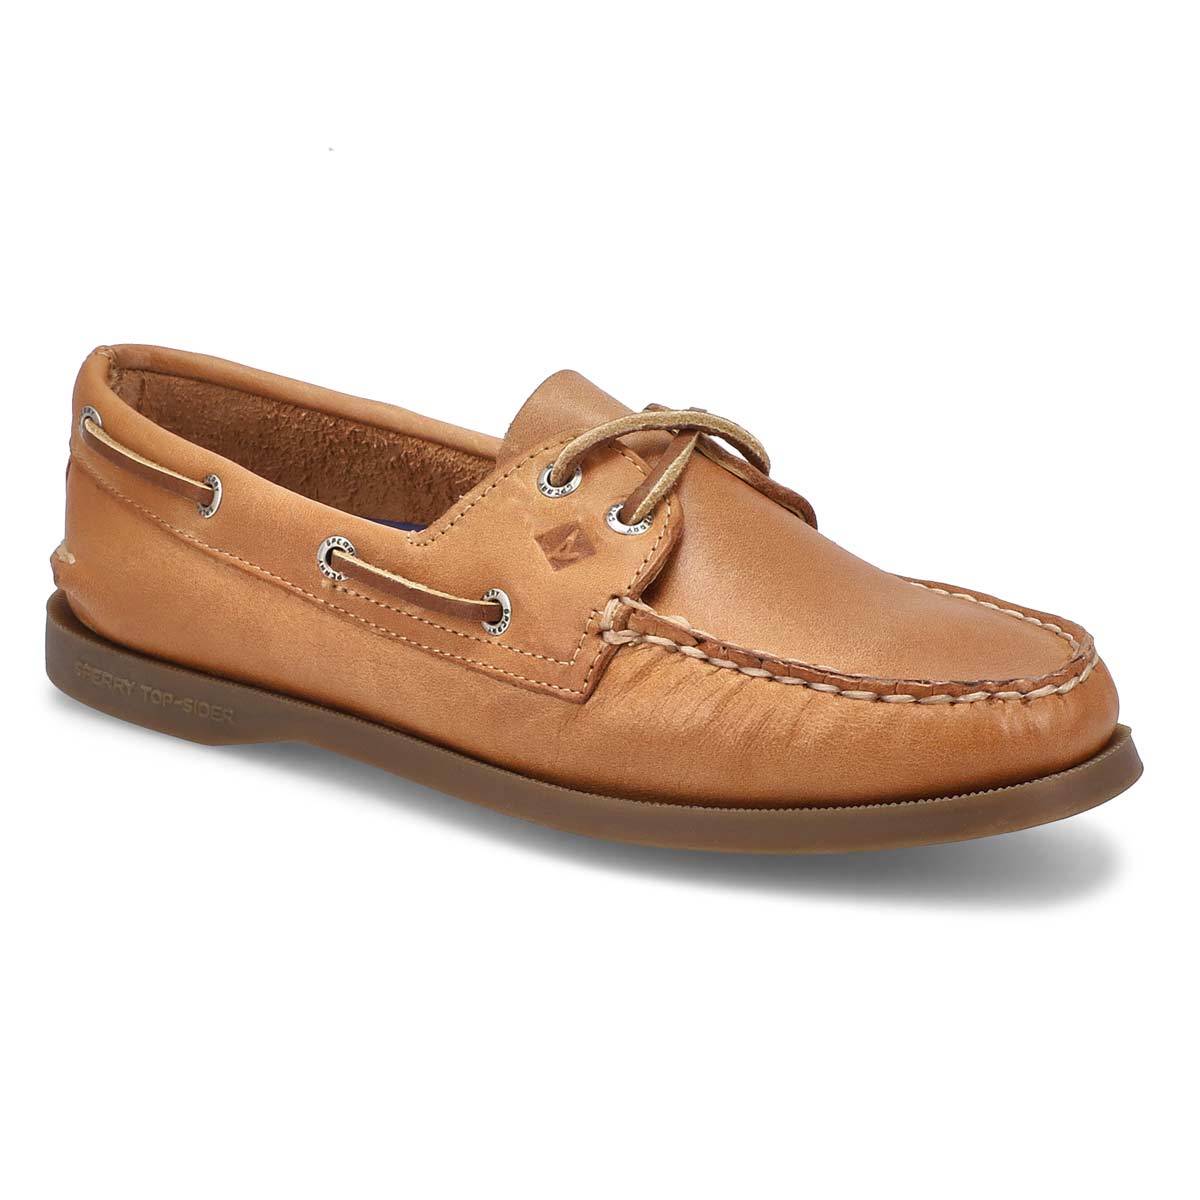 sperry women's boat shoes